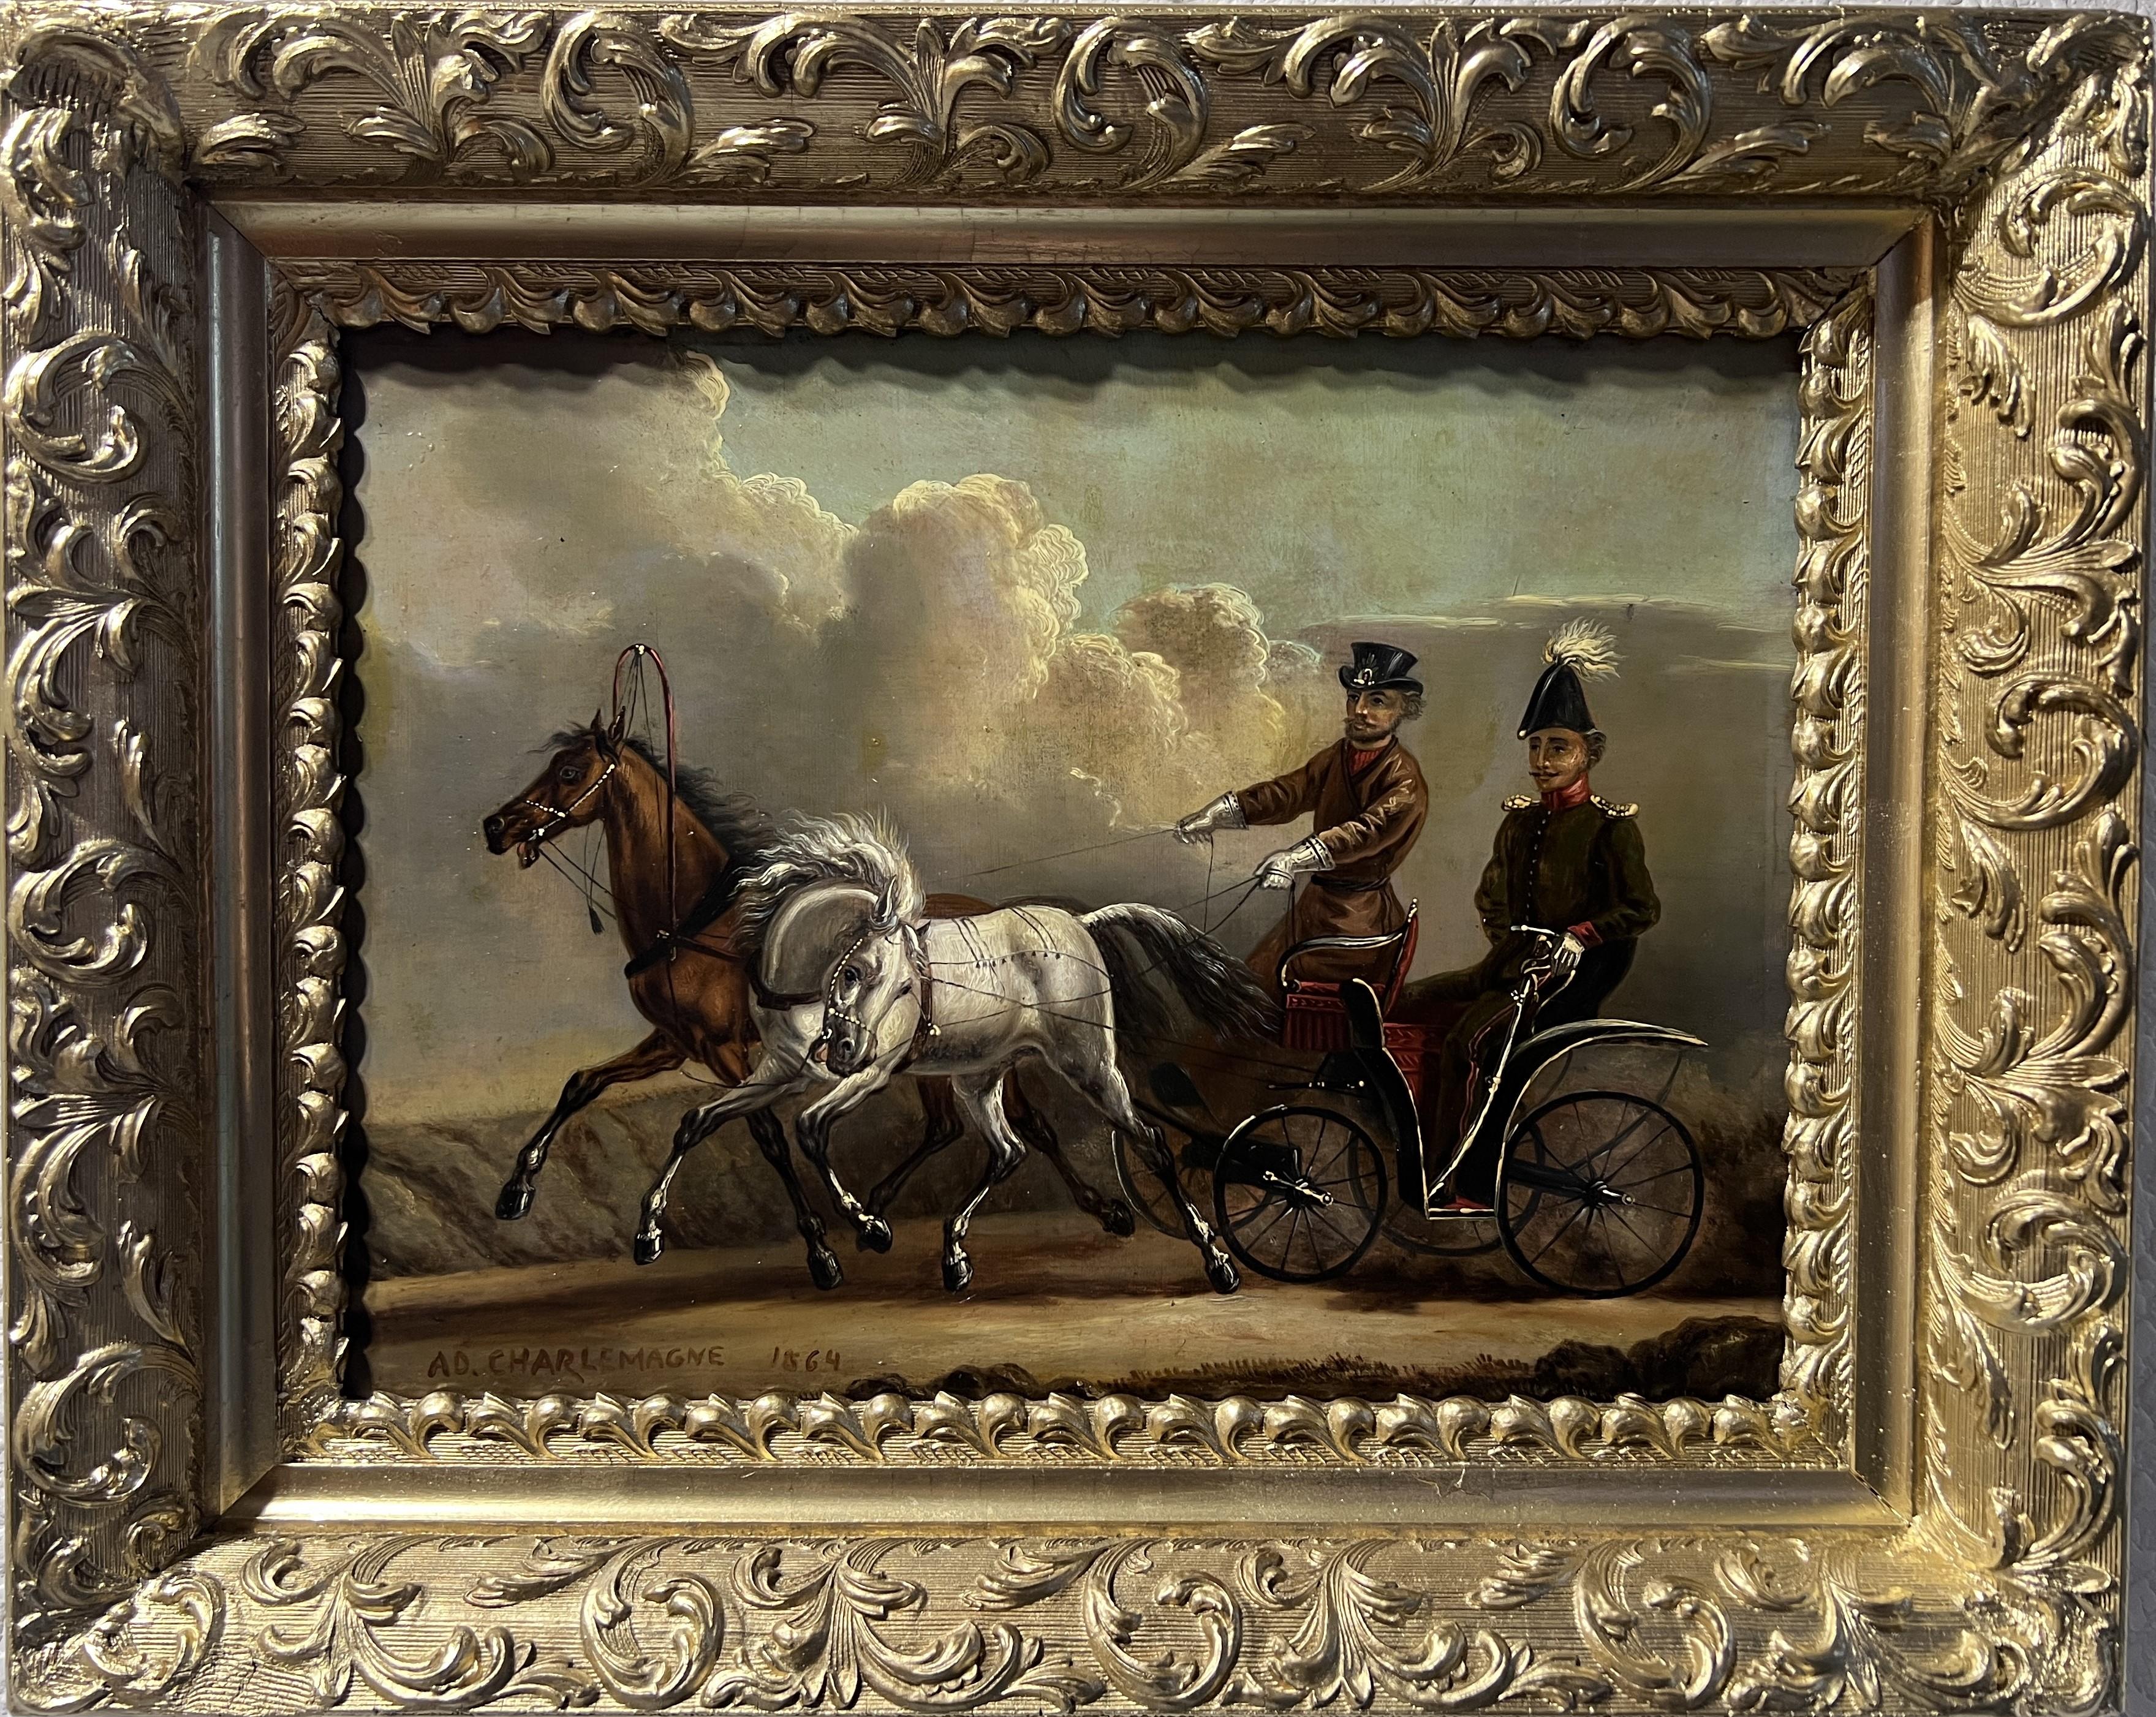 Up for sale is very rare unique Antique 19-century original oil painting on metal plate depicting a carriage ride by famous Russian Artist of His Imperial Majesty Alexander II -  Adolf Jossifowitsch Charlemagne (1826-1901).

Signed Ad. Charlemagne